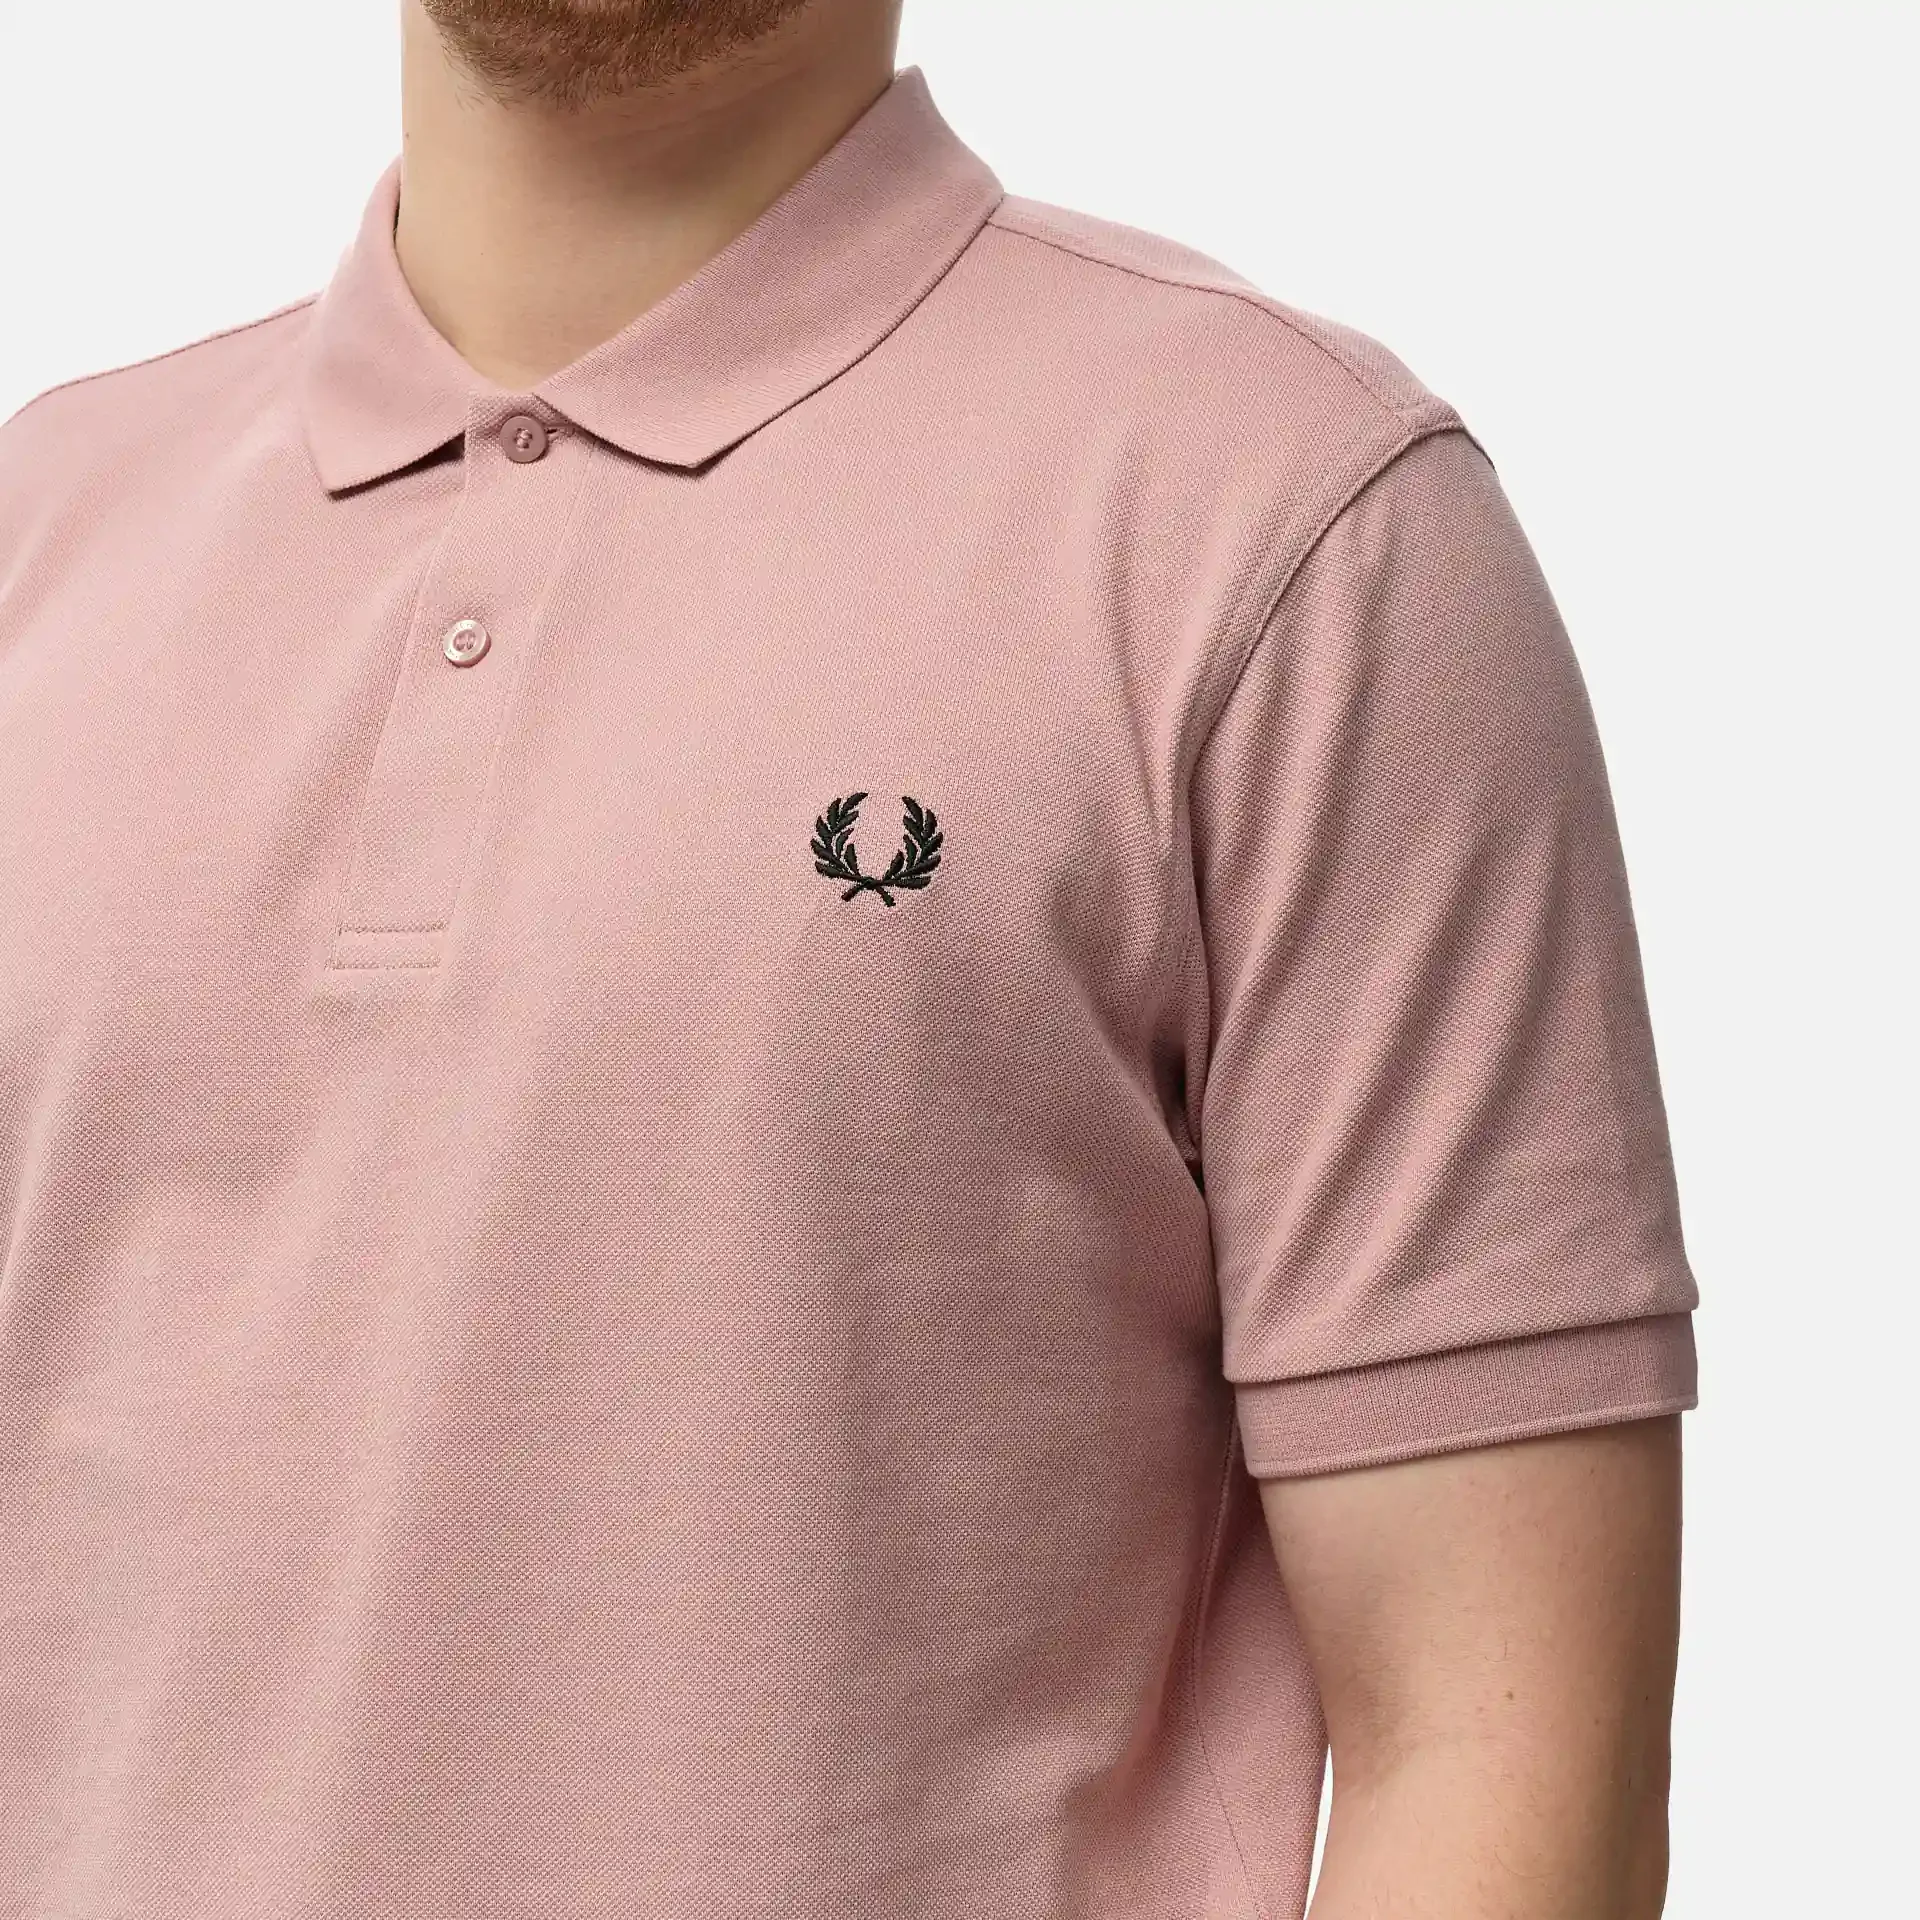 Fred Perry Plain Polo Shirt Dusty Rose Pink/Black